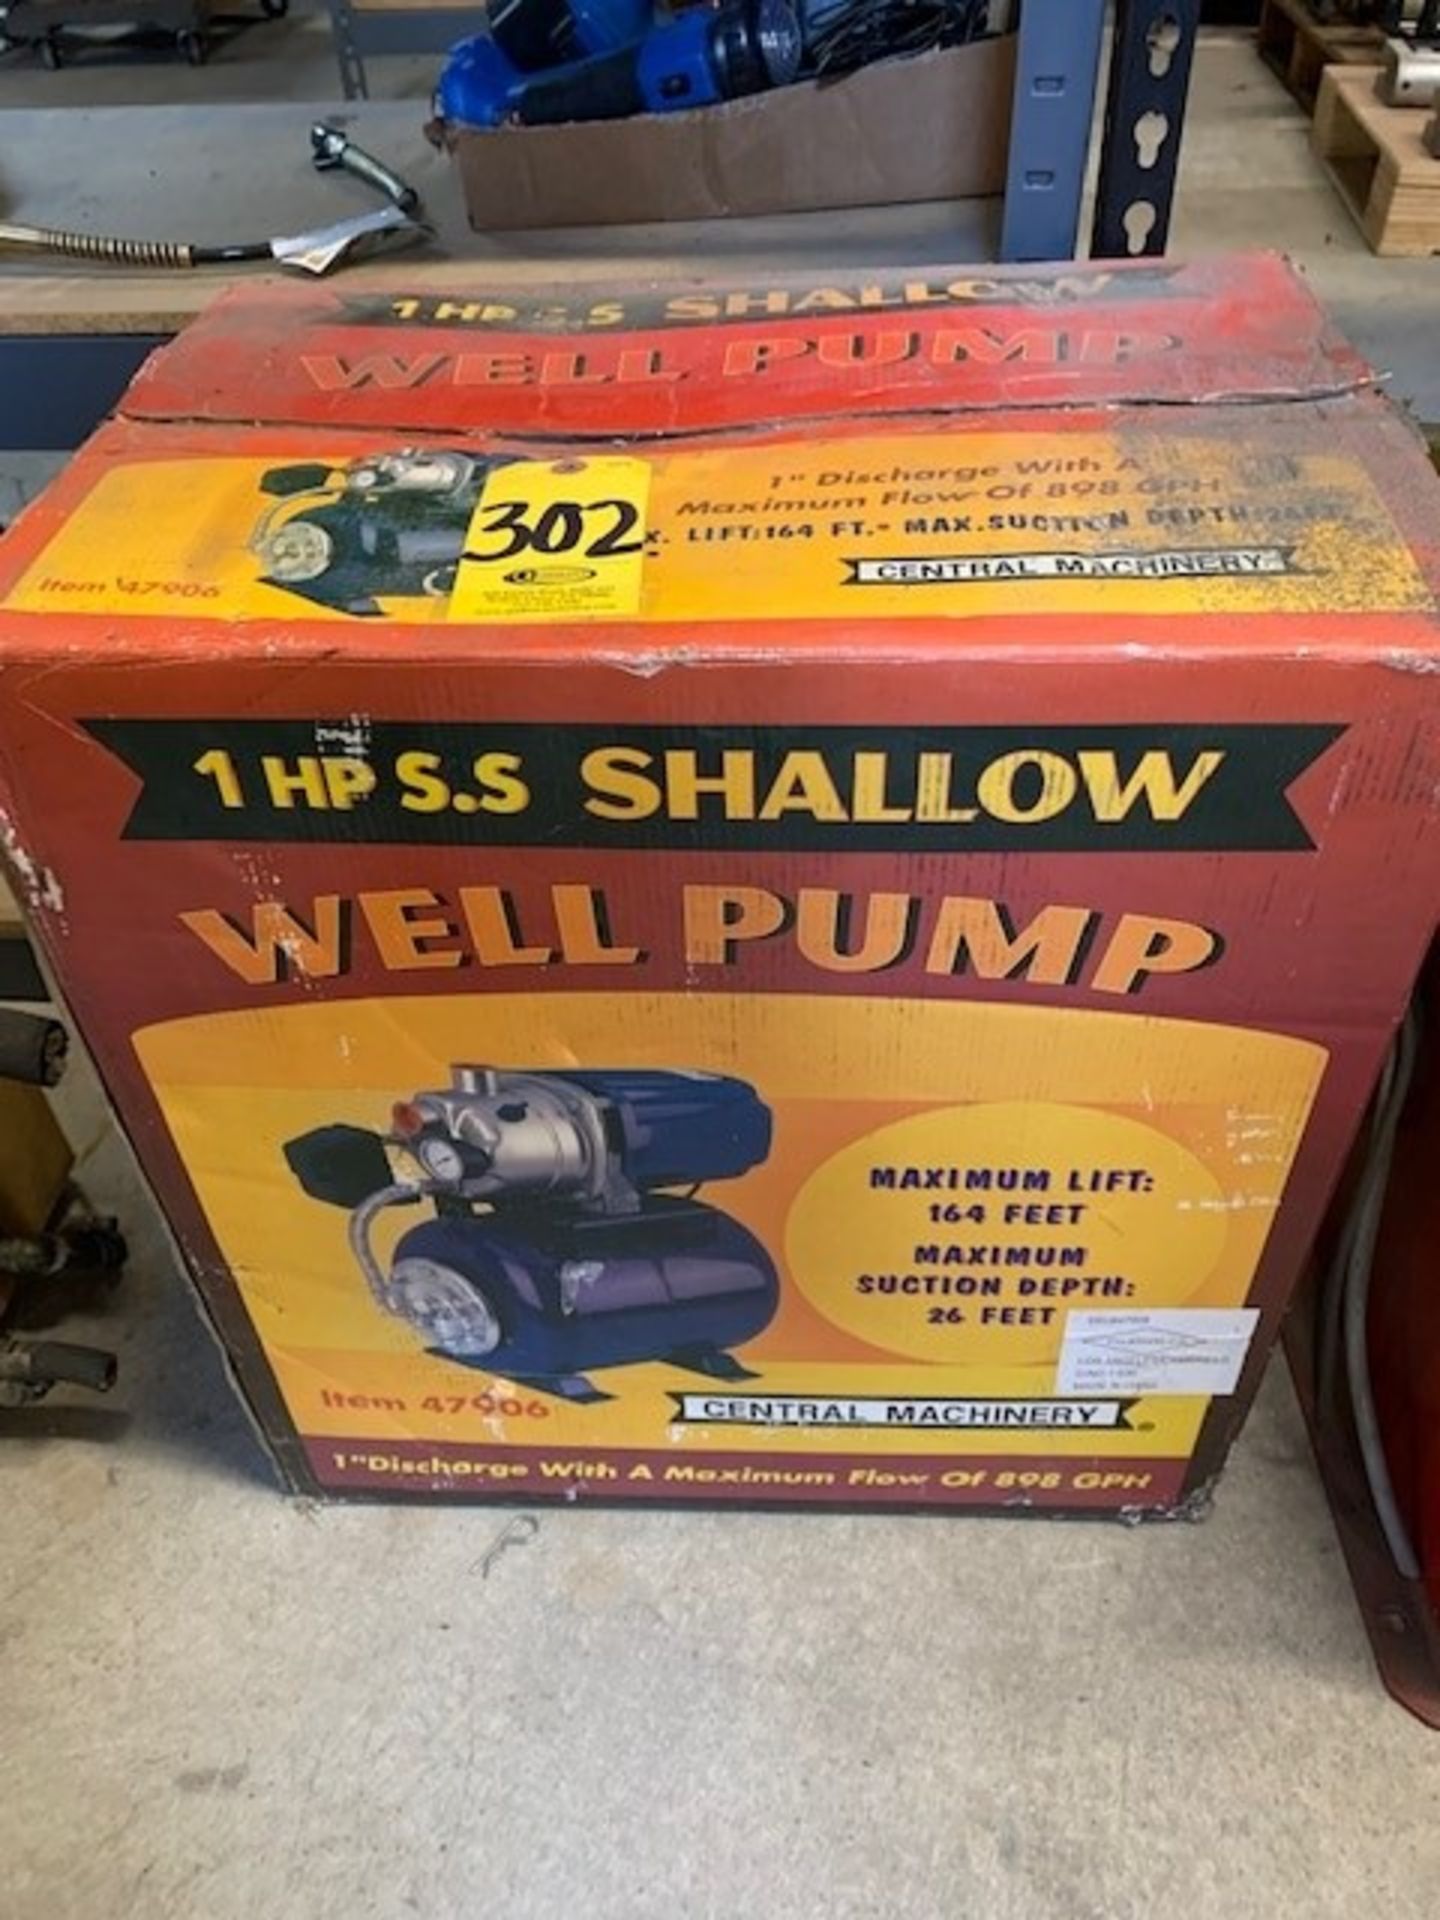 (NEW) CENTRAL MACHINERY 47906 1HP SS SHALLOW WELL PUMP, 1 IN. DISCHARGE